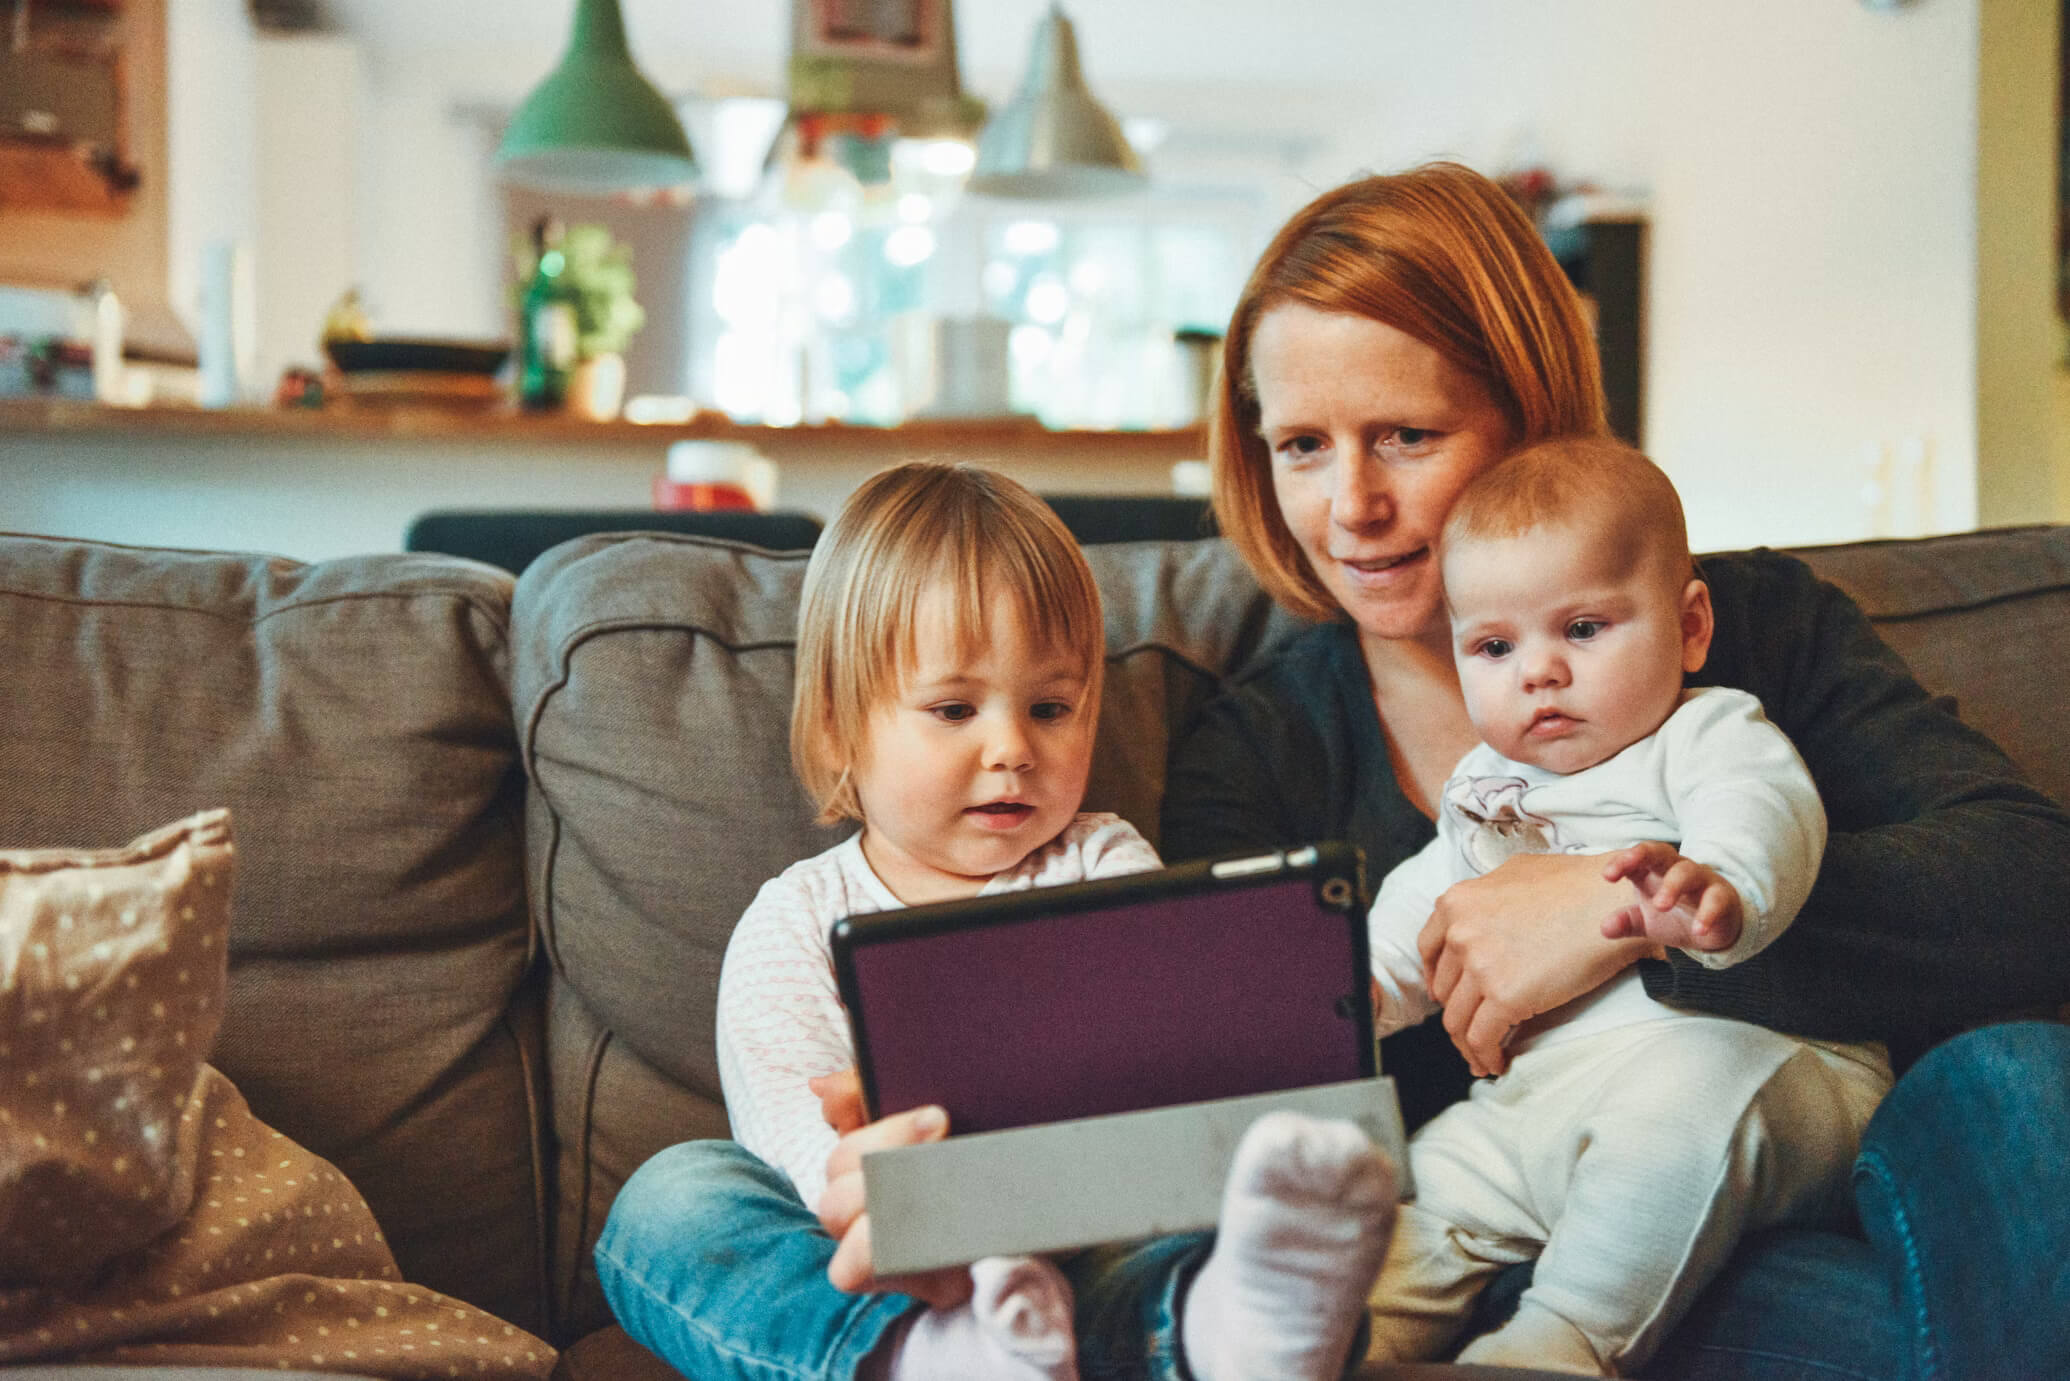 Woman, a toddler and a baby sitting on a sofa looking at a tablet together.